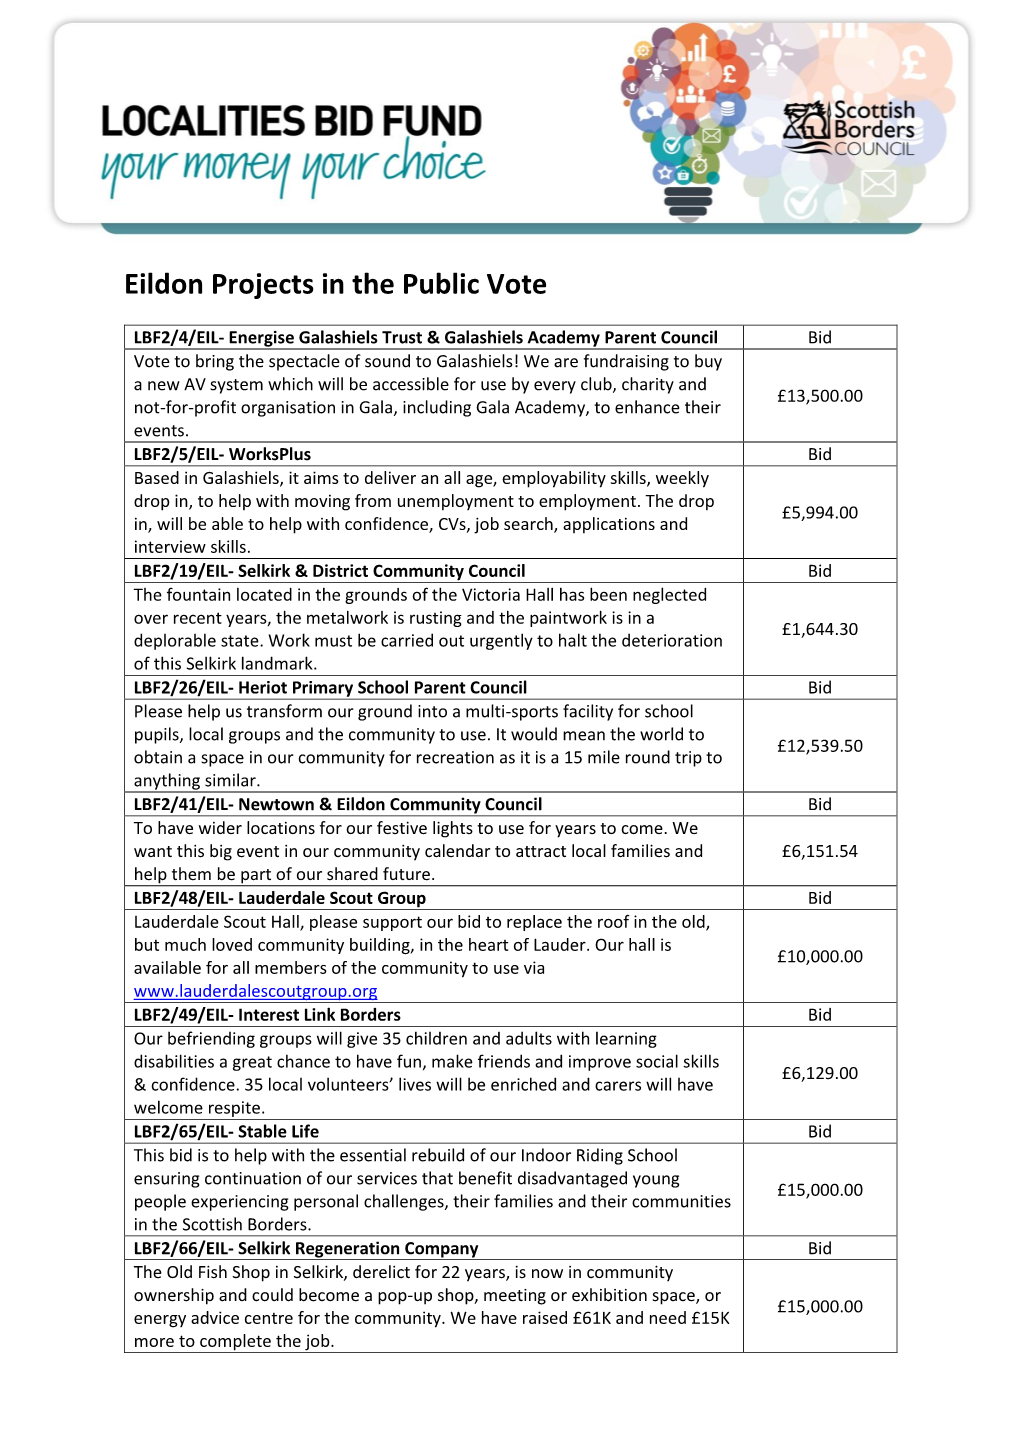 Eildon Projects in the Public Vote